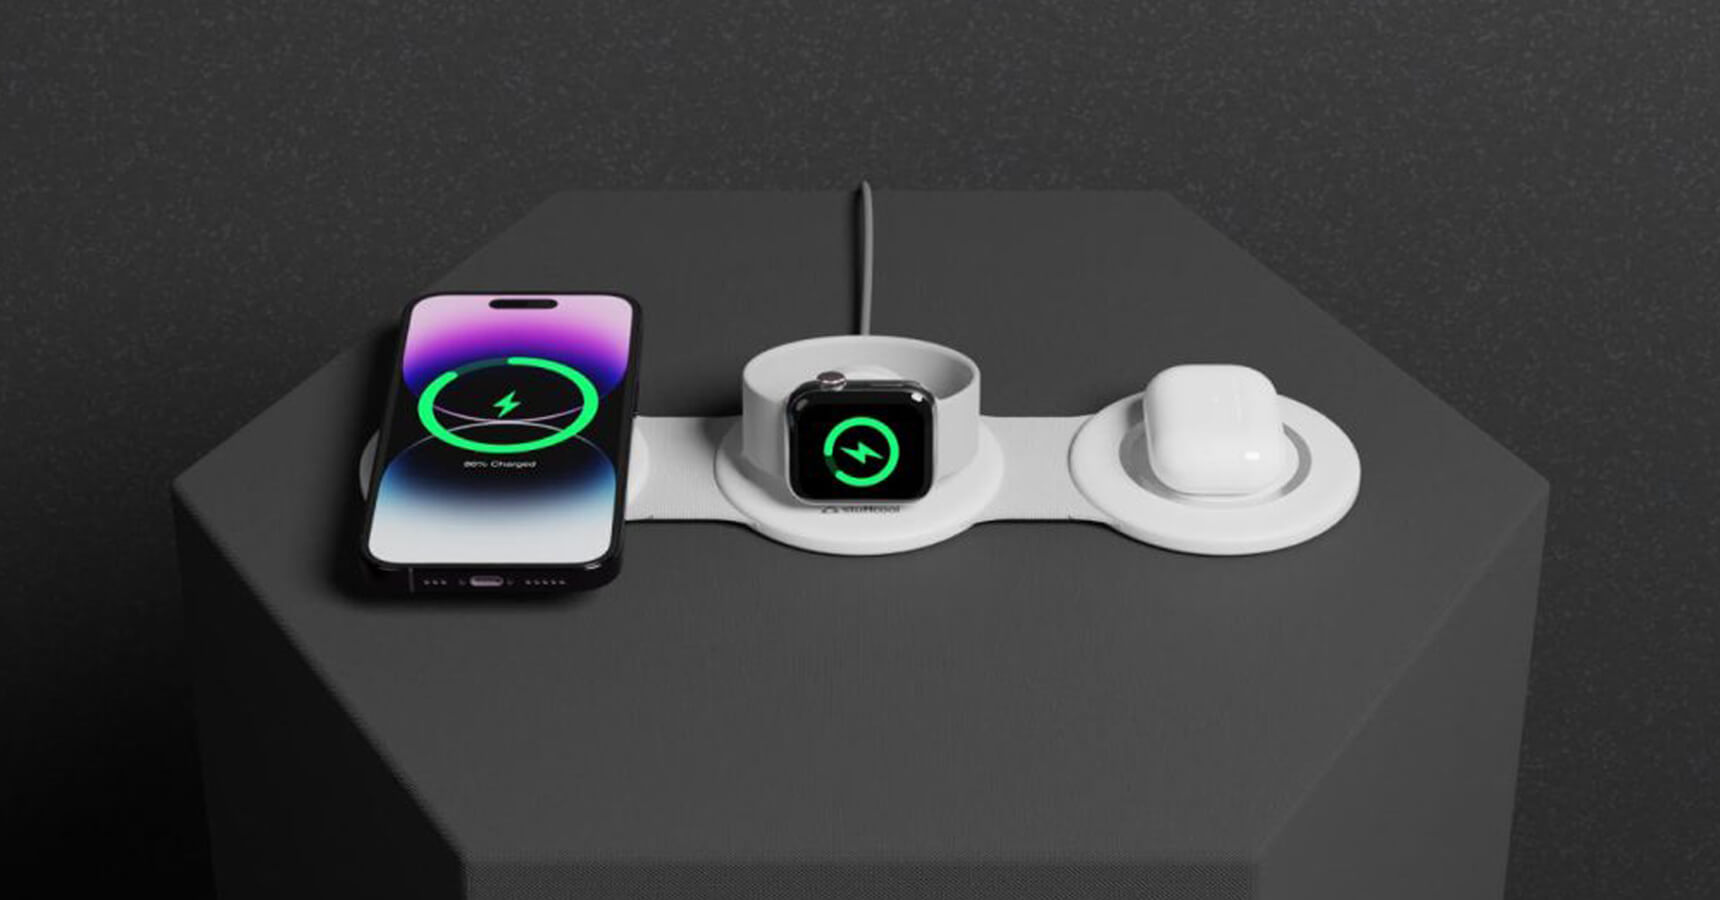 Stuffcool Stack Wireless Charger launched